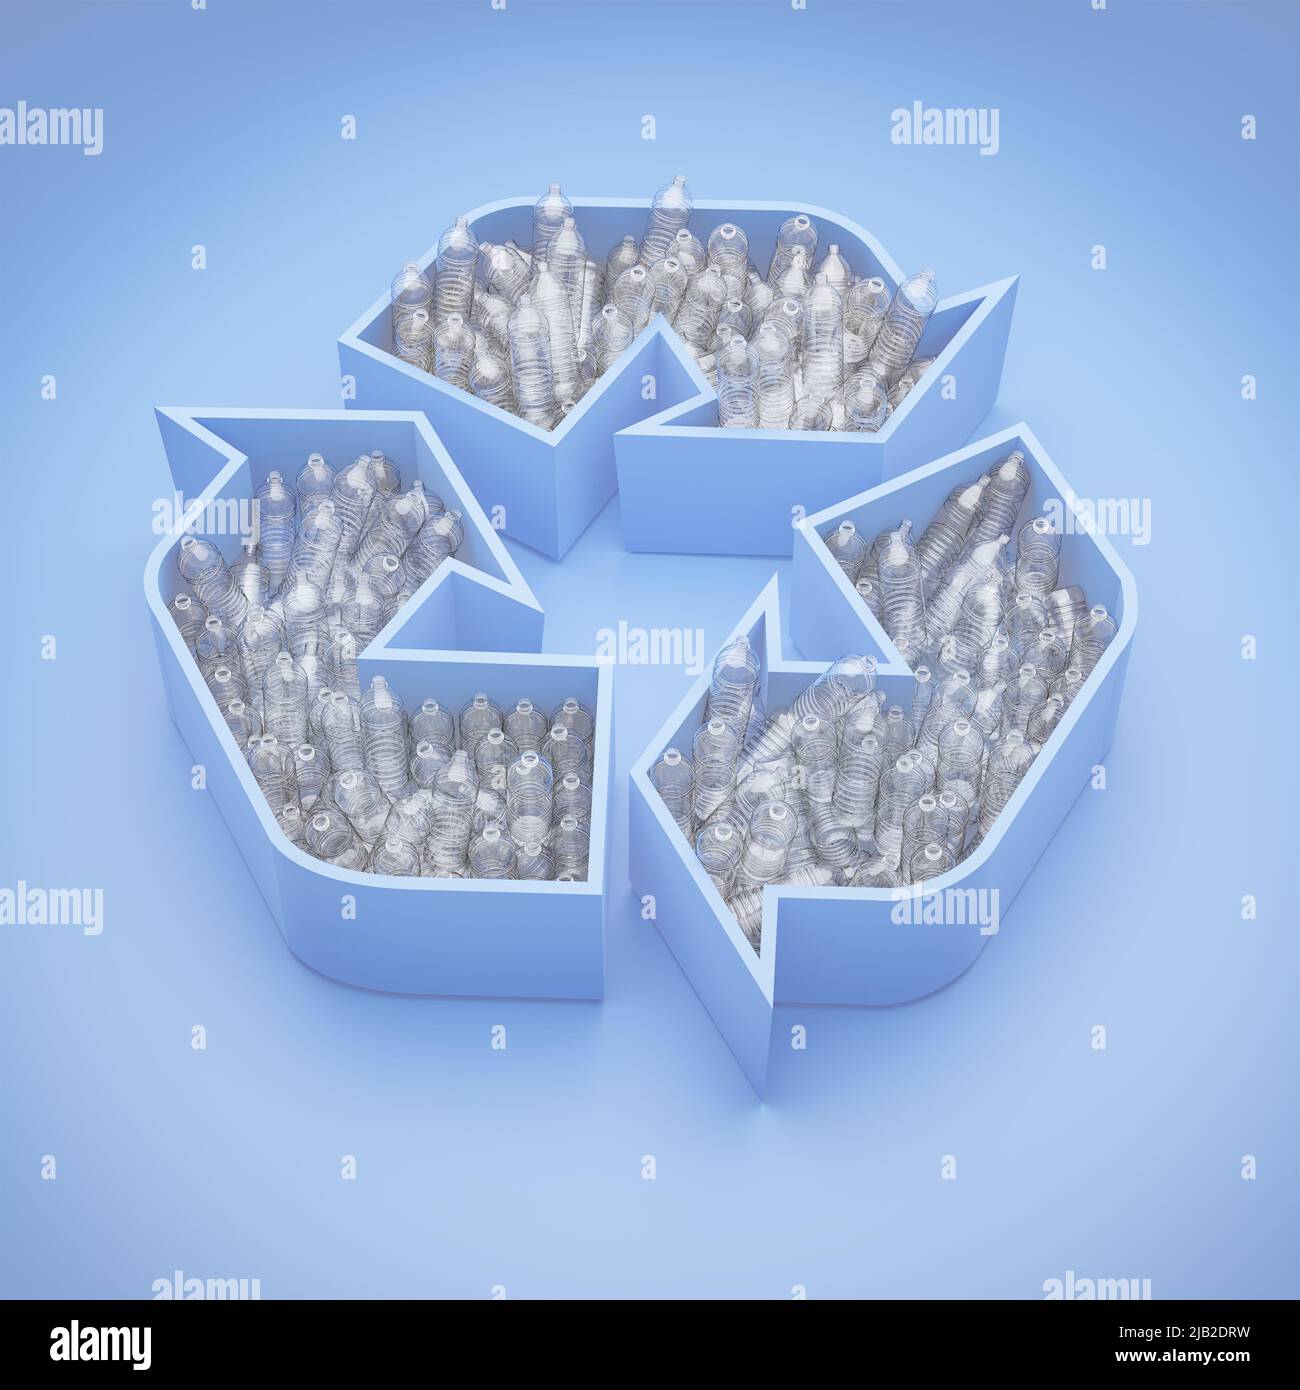 Empty plastic water bottles in a recycling logo. Concept for recycling of plastic waste. Stock Photo